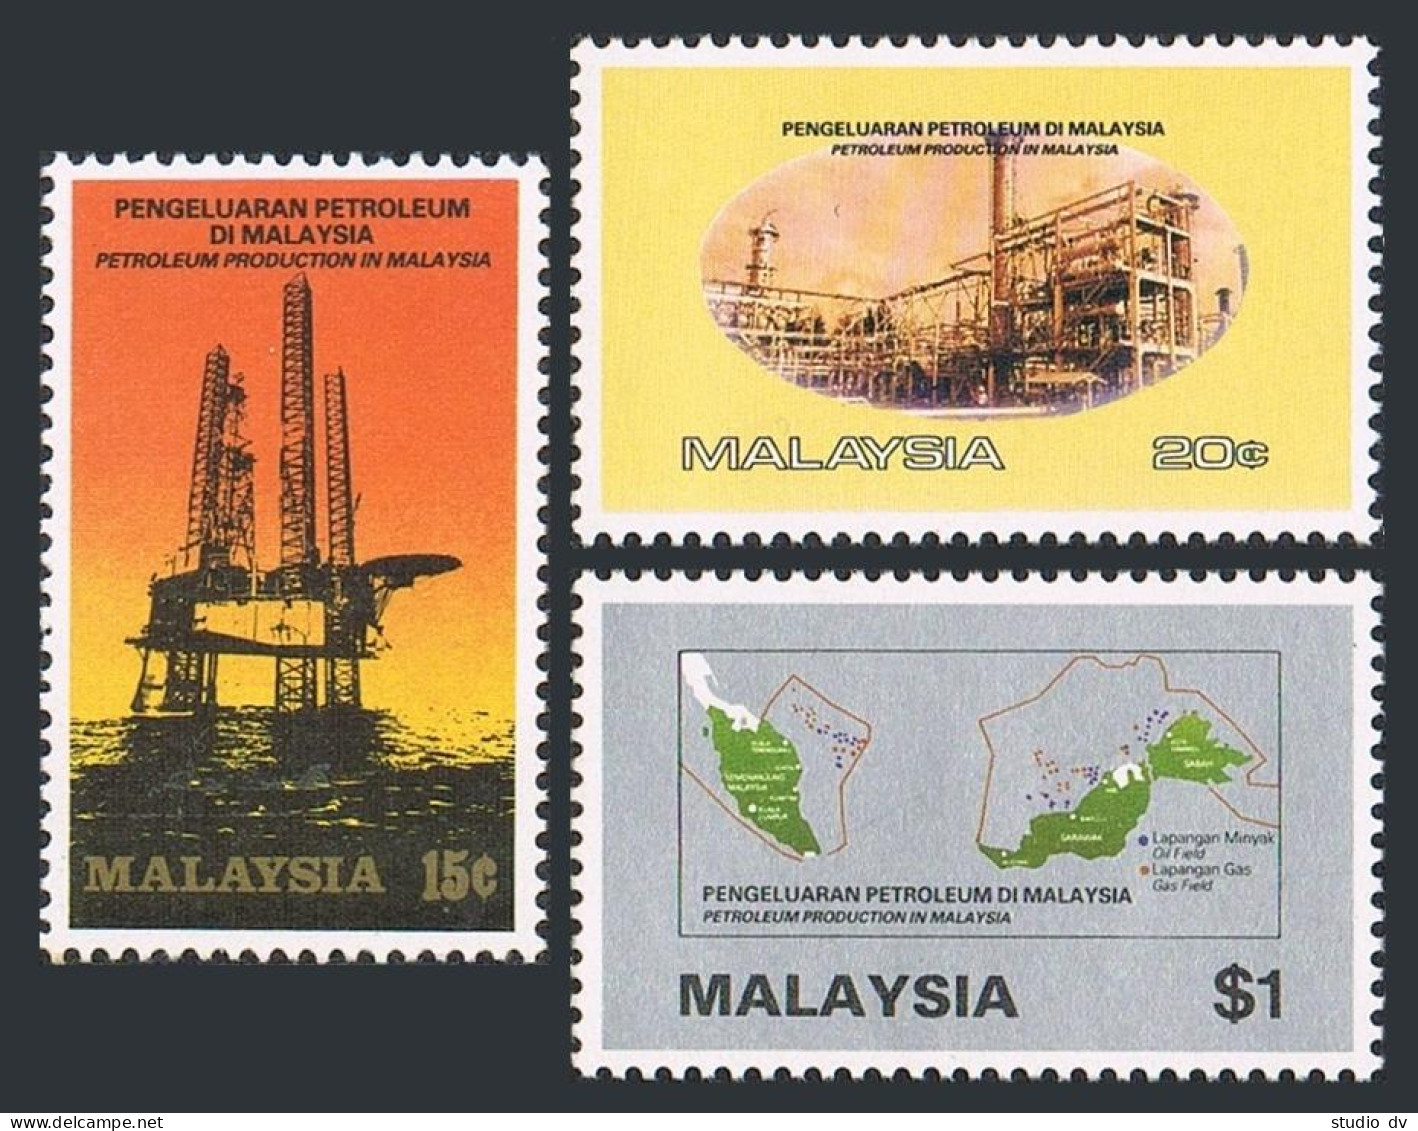 Malaysia 314-316, MNH. Mi 314-316. National Oil Industry, 1985. Offshore Rig,Map - Malaysia (1964-...)